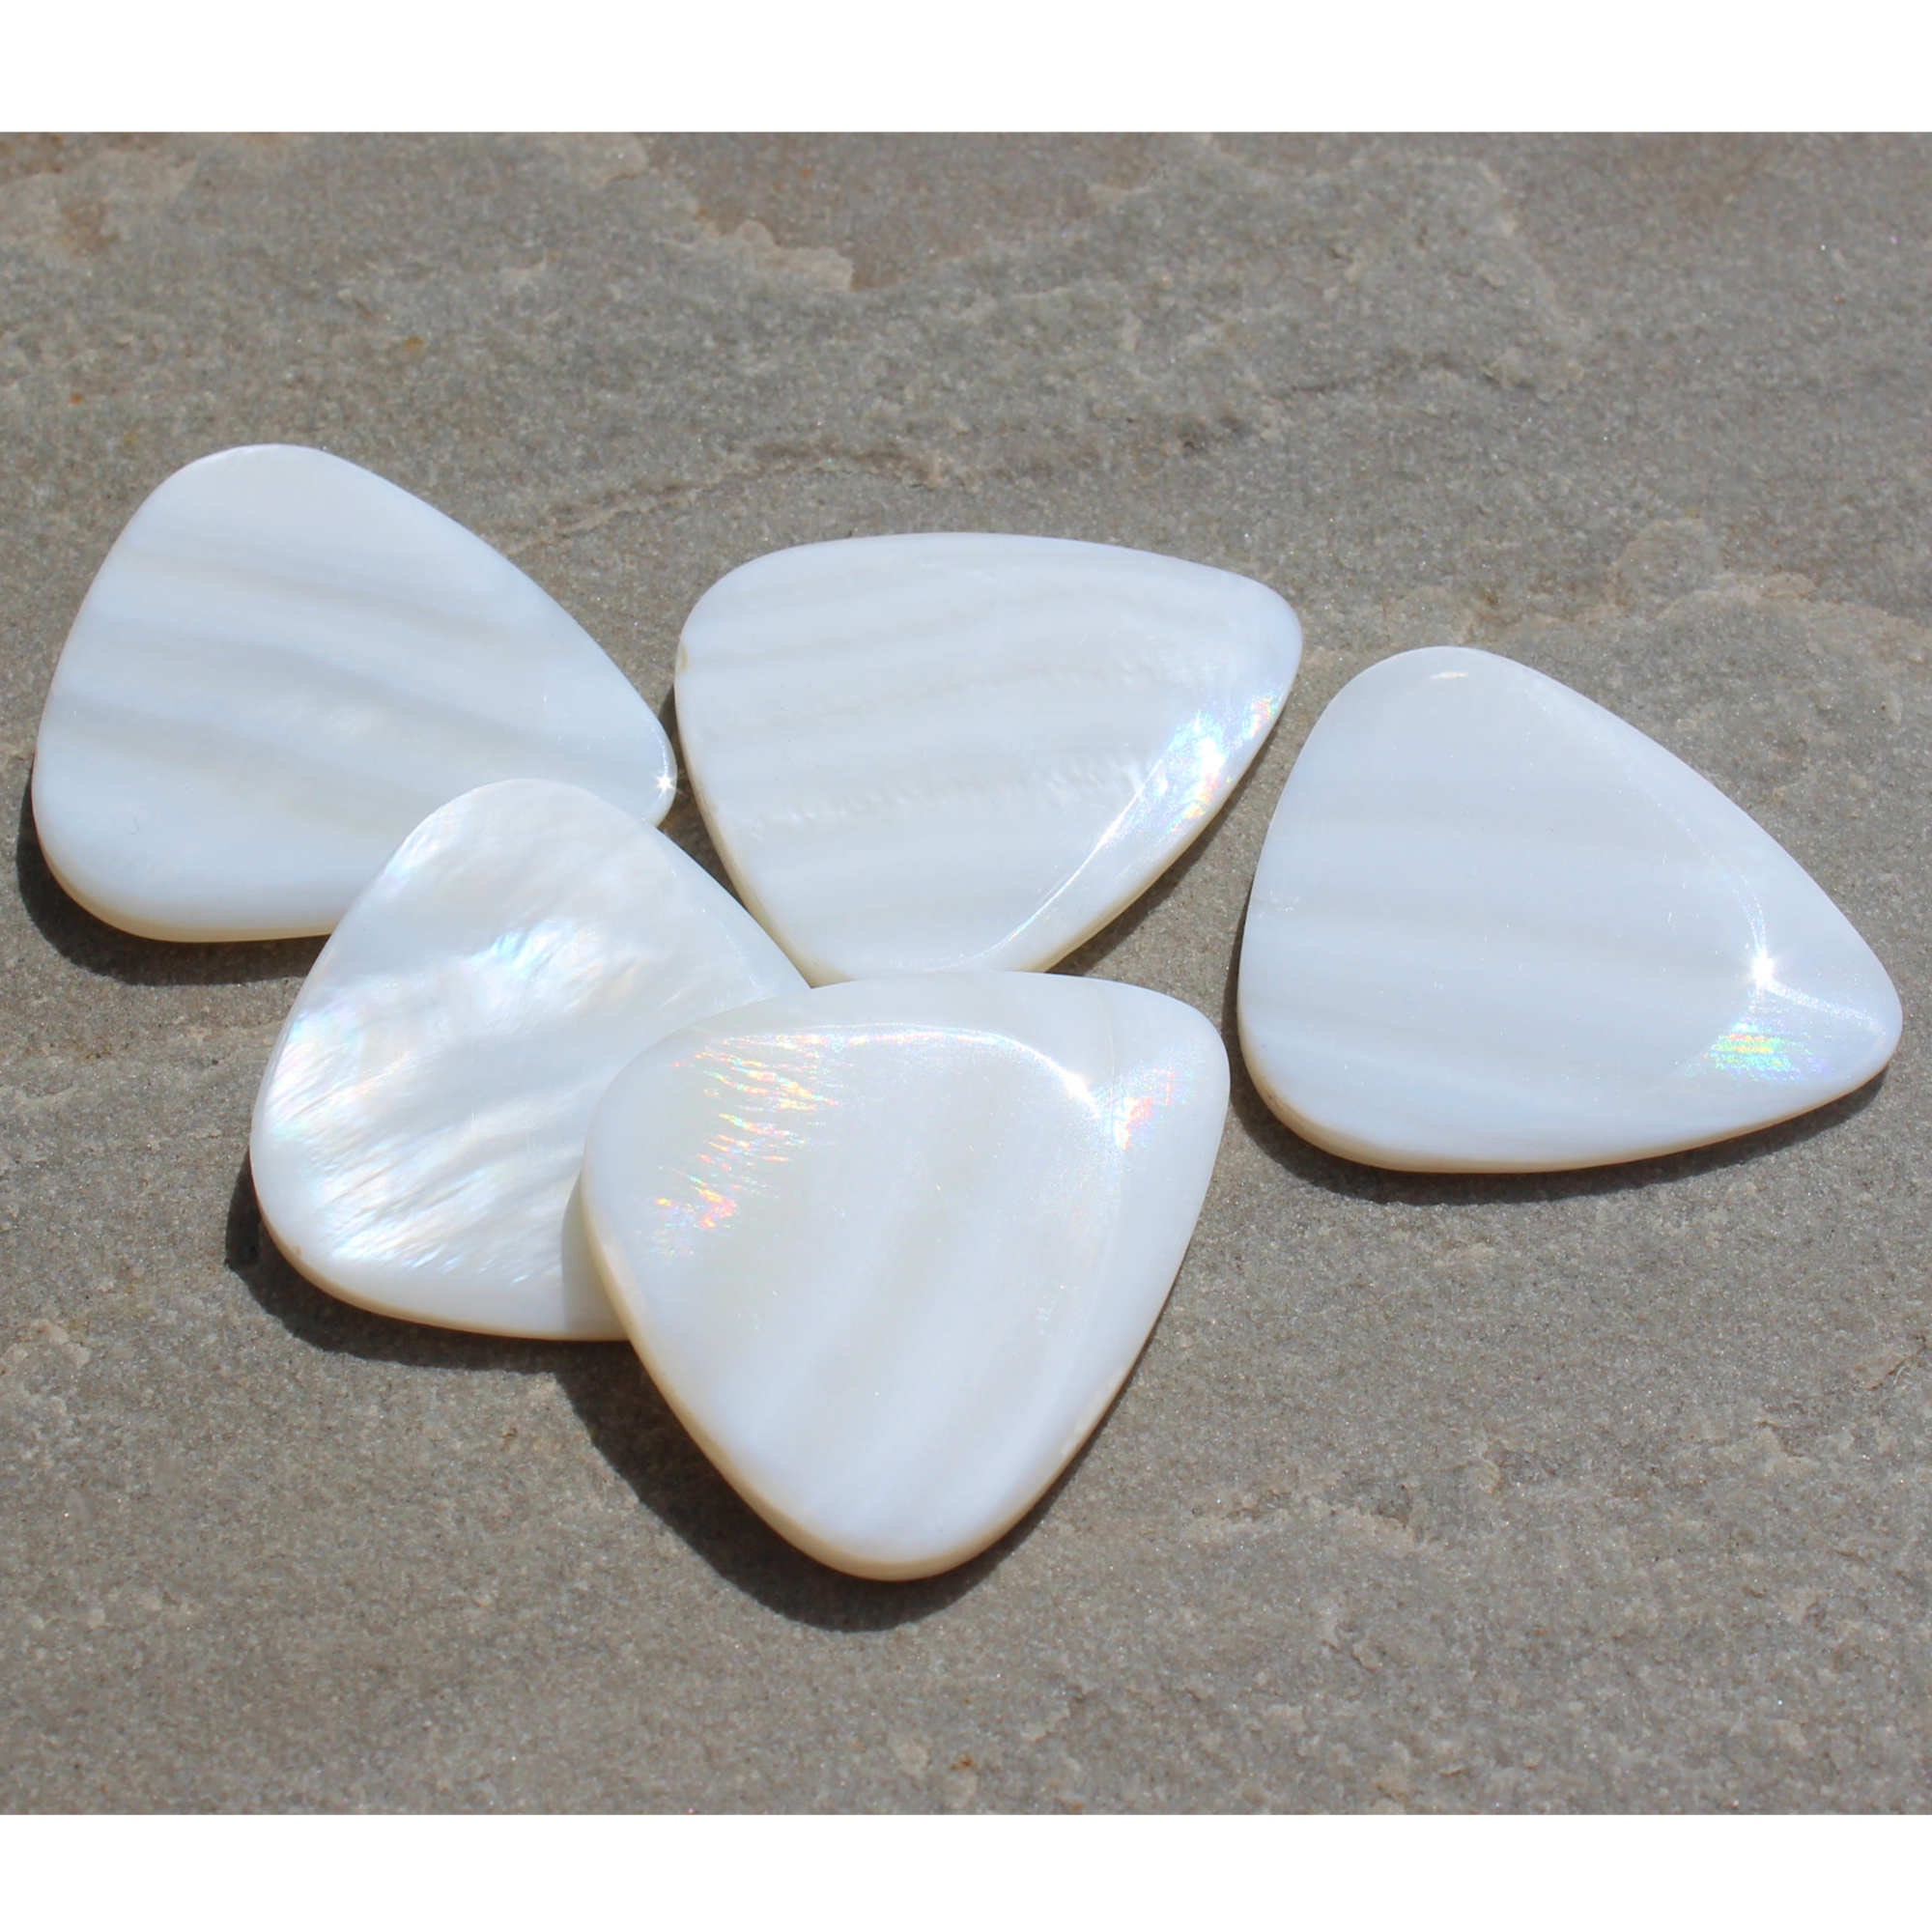 Donner Celluloid Guitar Picks 48 Pieces Includes 4 India